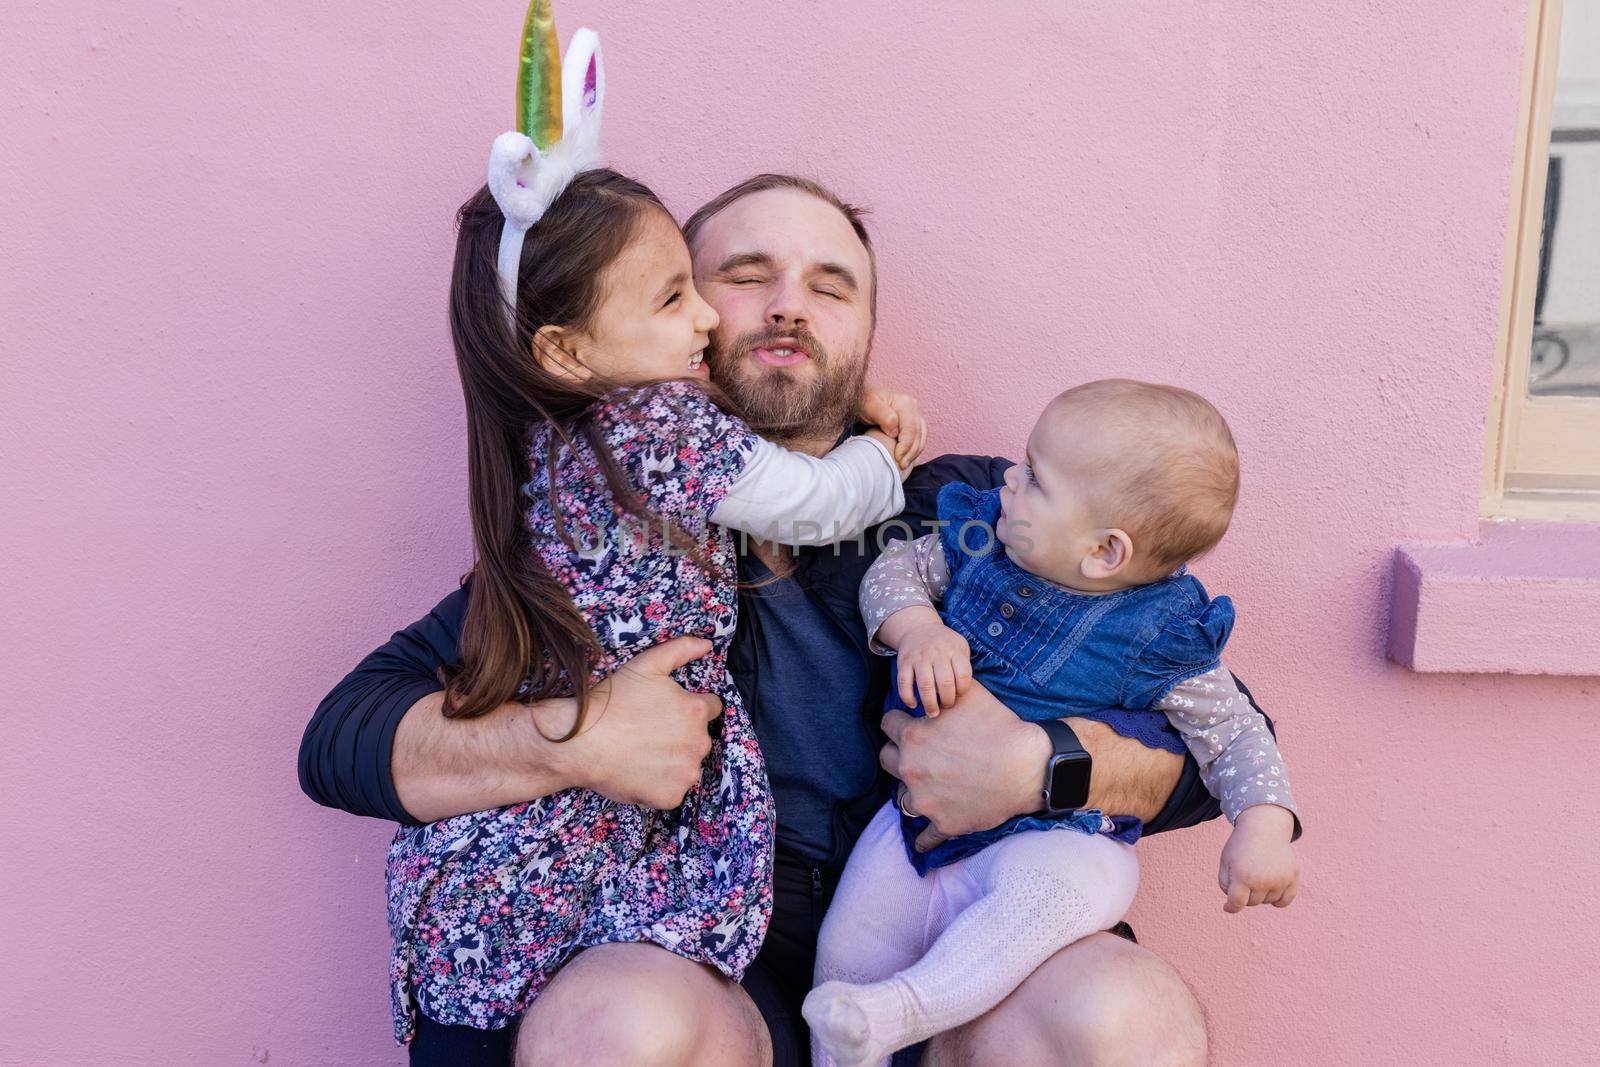 Portrait of little girl lovely hugging her father while holding cute baby in front of a pink wall. Adorable view of smiling bearded man sitting and holding joyful daughters. Happy family outdoors